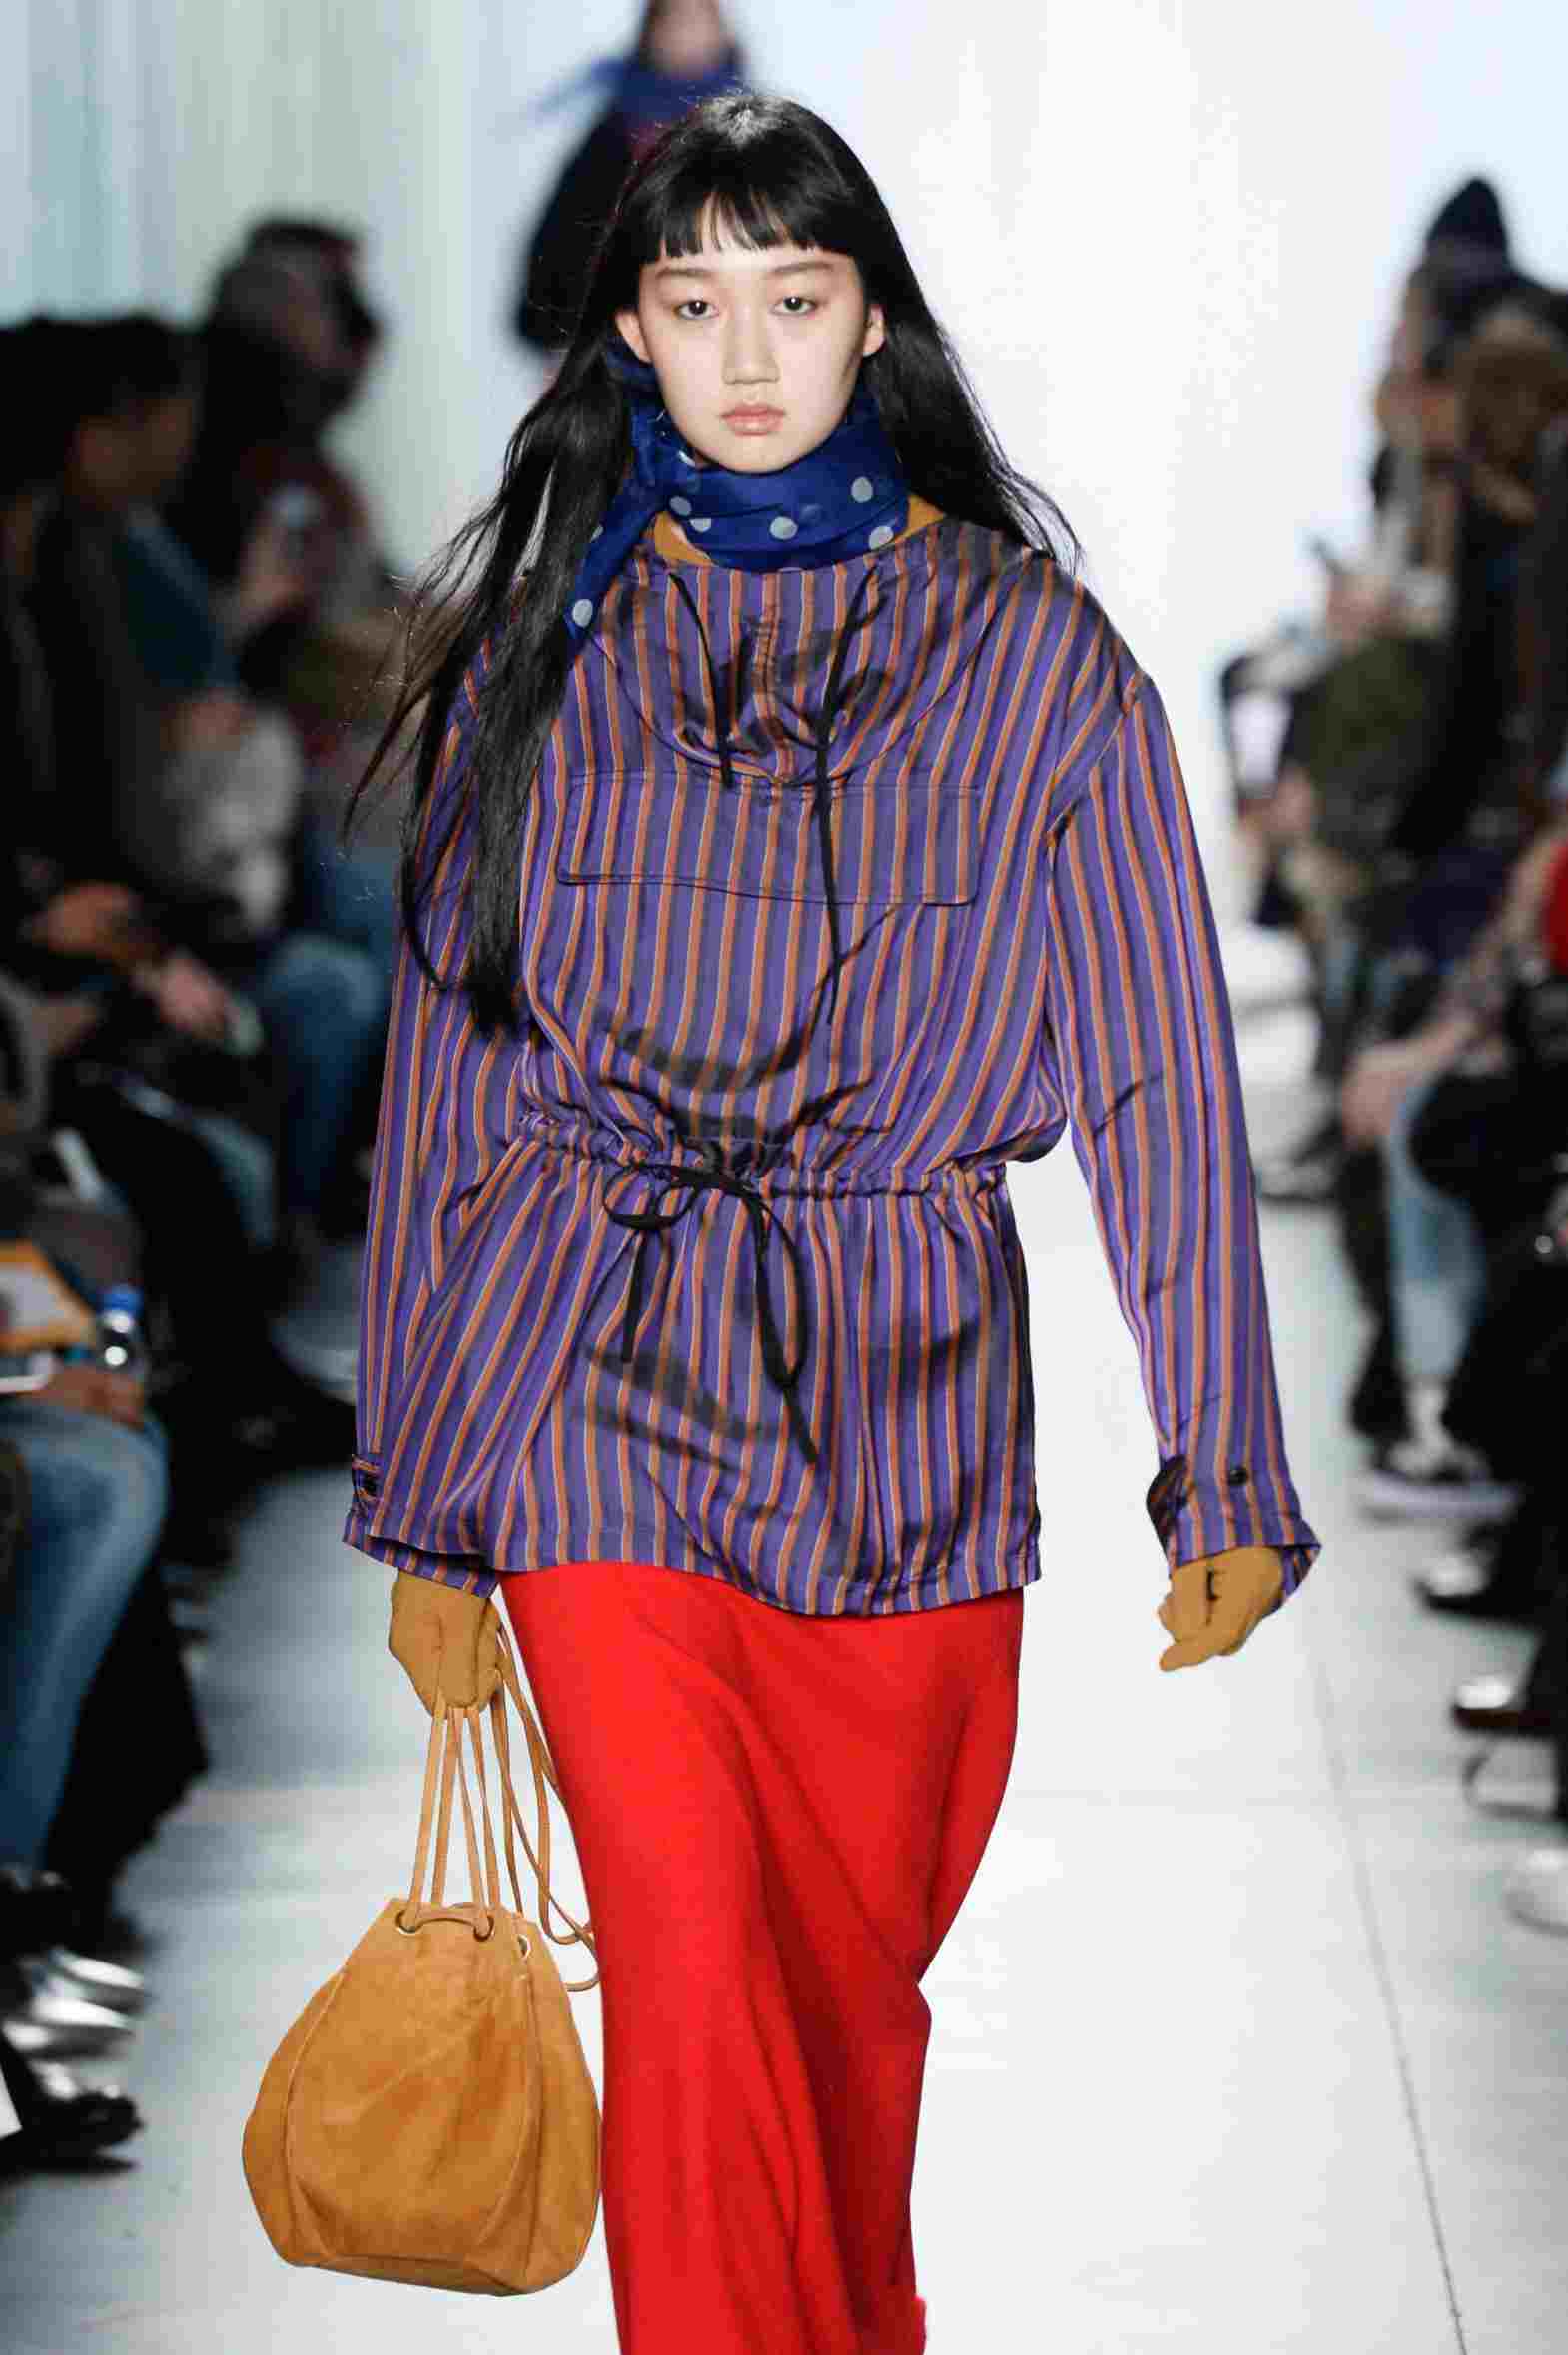 Violet with red combine fashion trend handbag from wild leather